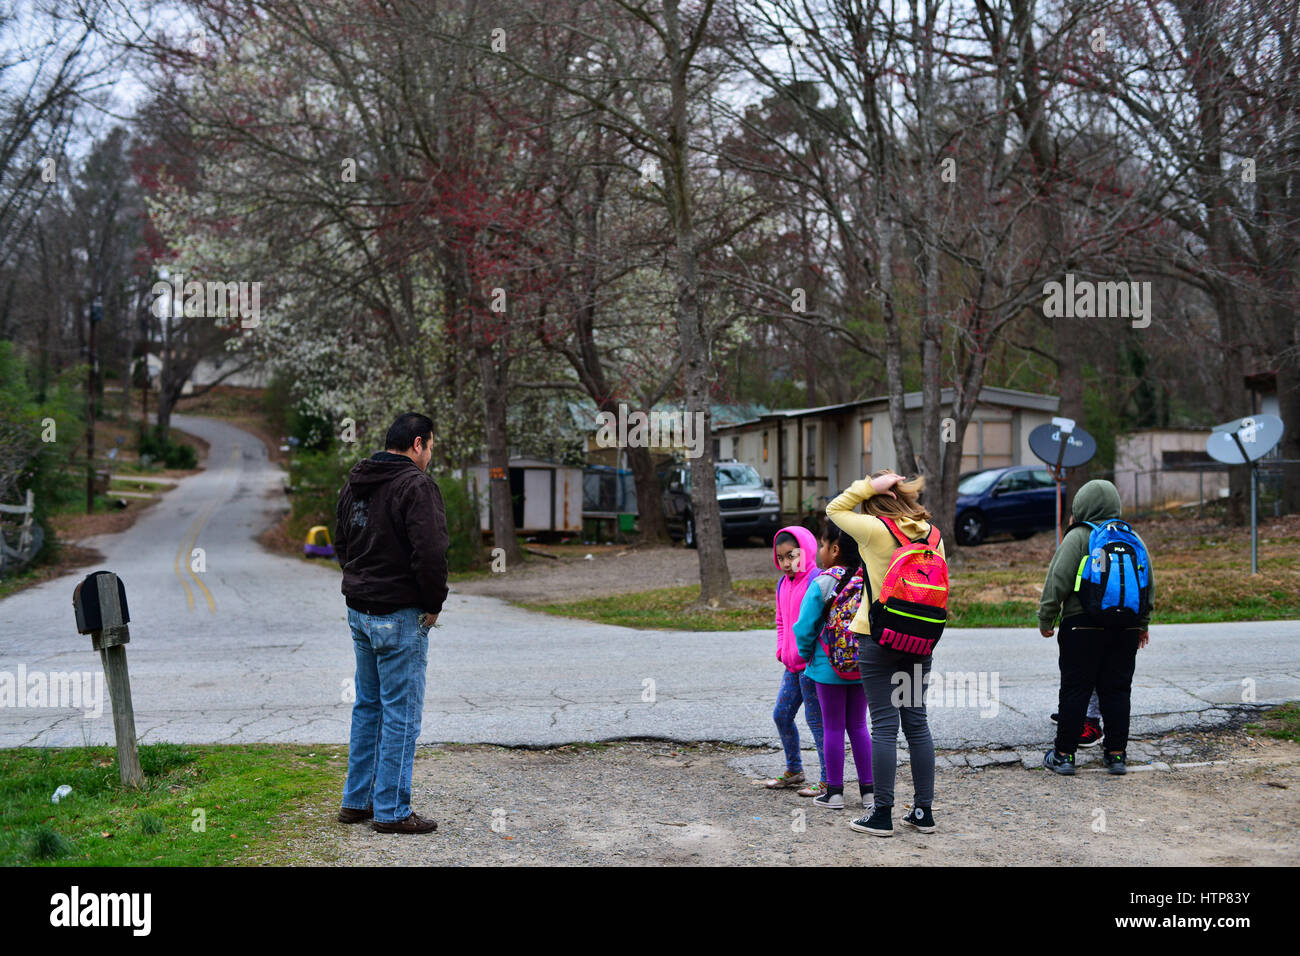 February 28, 2017 - Enrique, an undocumented immigrant from Mexico, waits for the bus to take his daughter Abigail, a 6-year-old American citizen, to school in the Gainesville public school district, which is now 58 percent Latino, a percentage growing every year. The most recently-built elementary school is almost entirely Latino. Credit: Miguel Juarez Lugo/ZUMA Wire/Alamy Live News Stock Photo